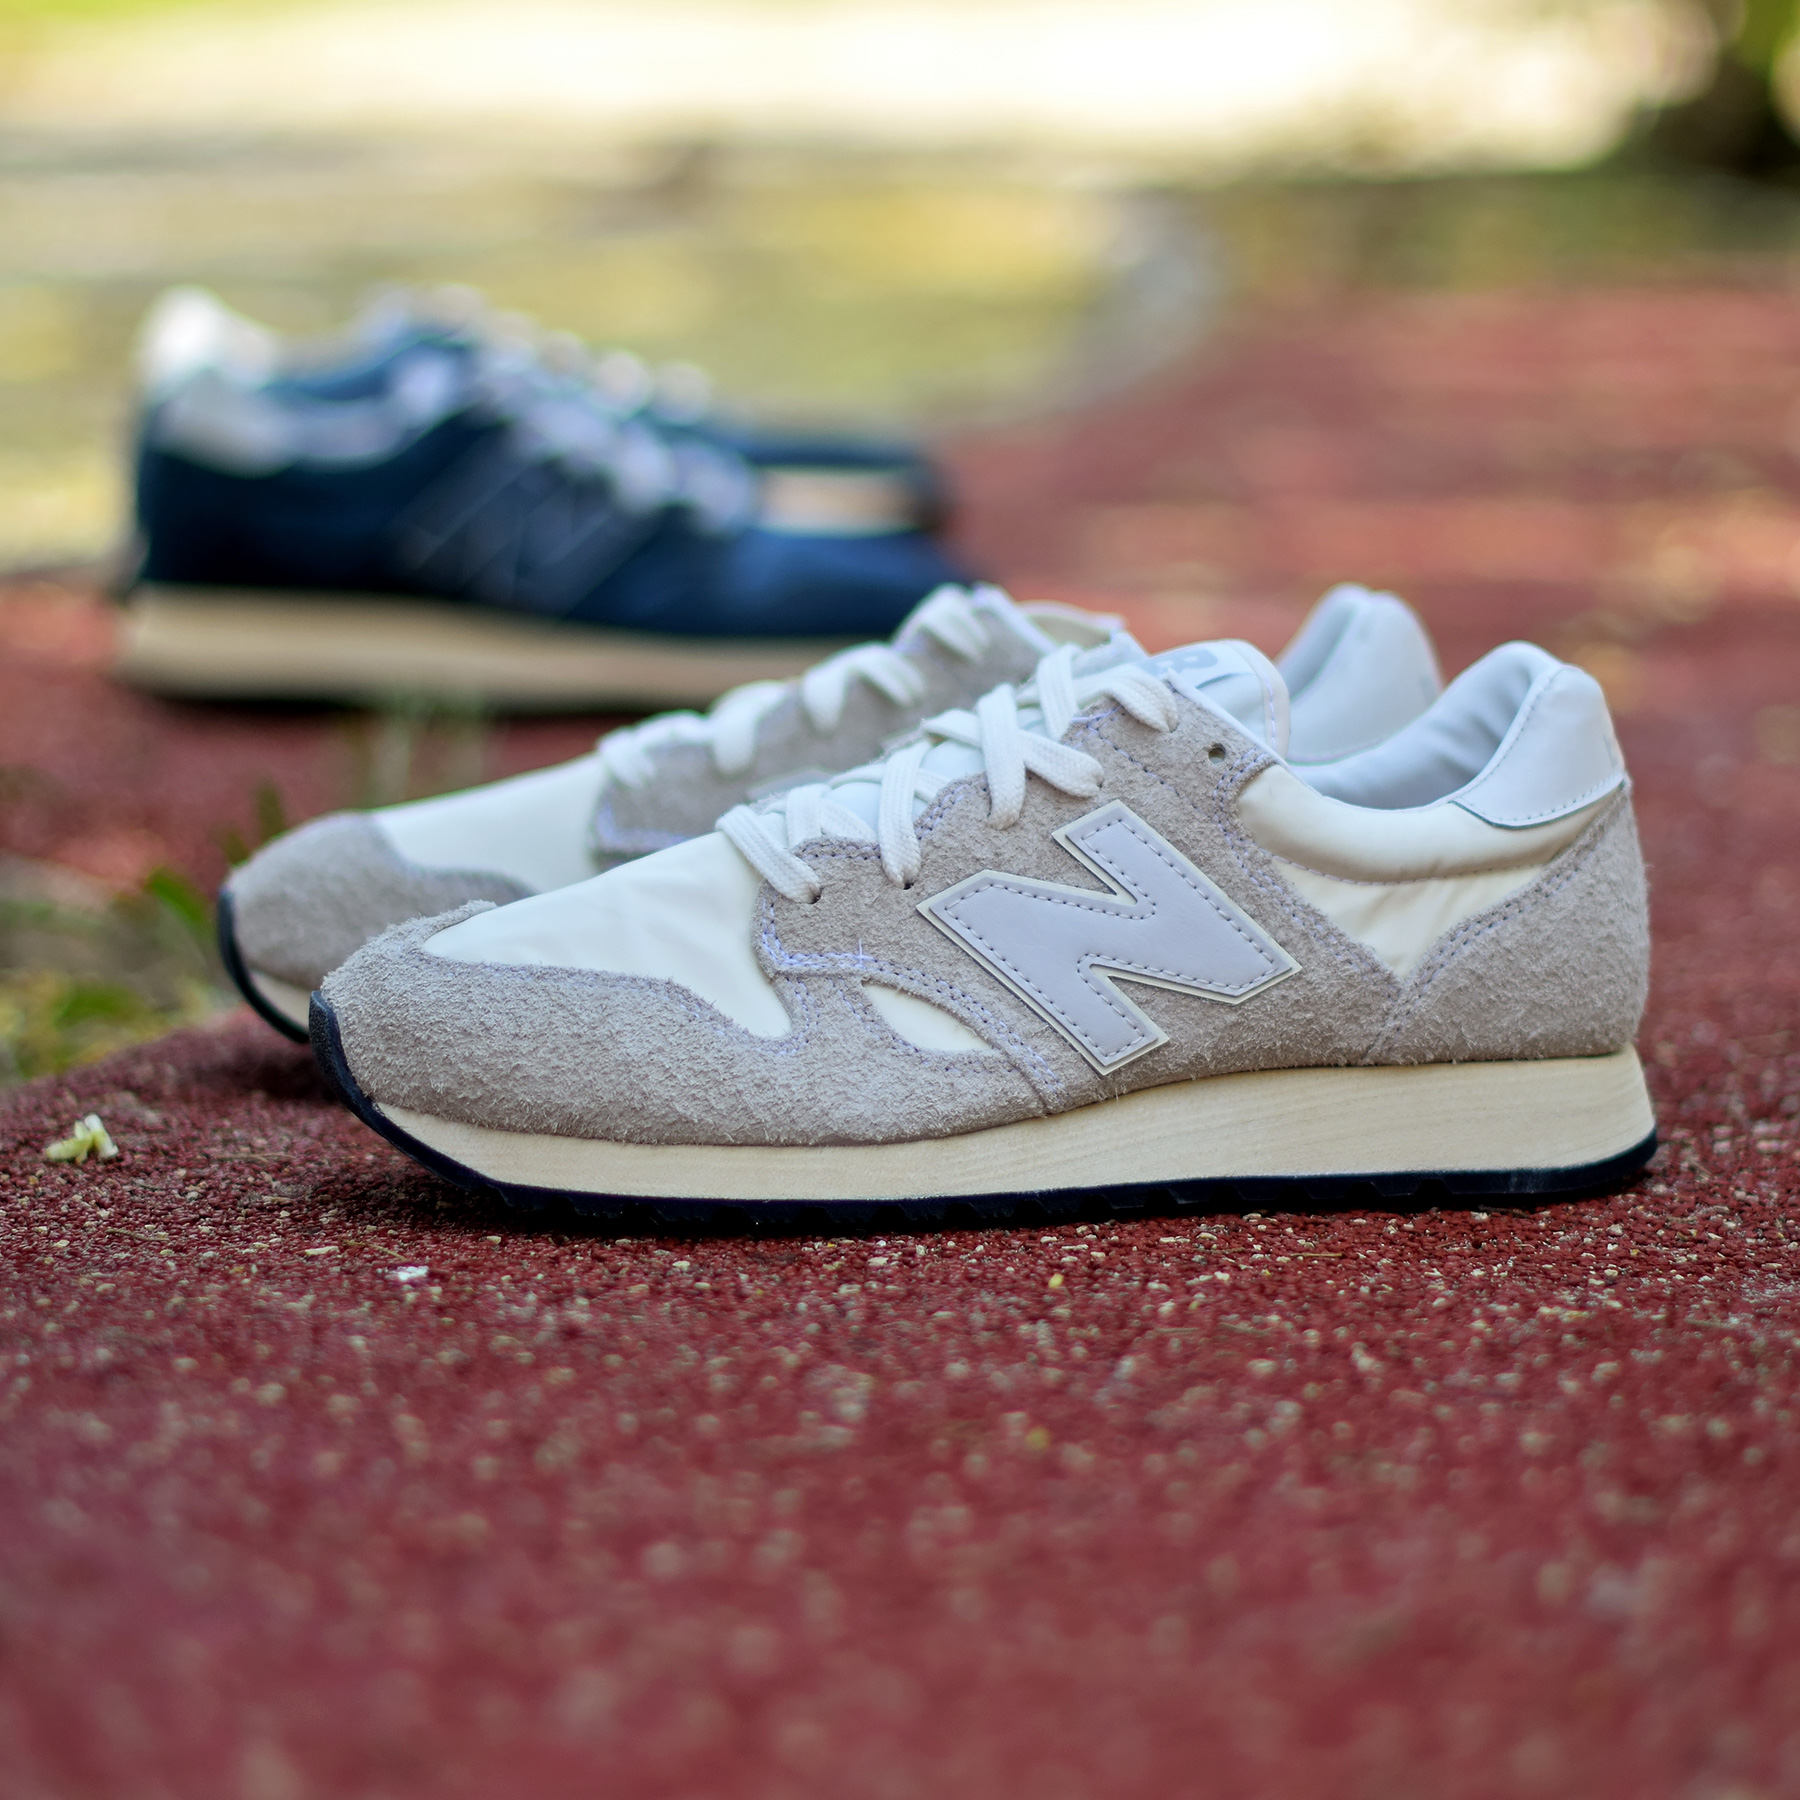 new balance 373 hairy suede